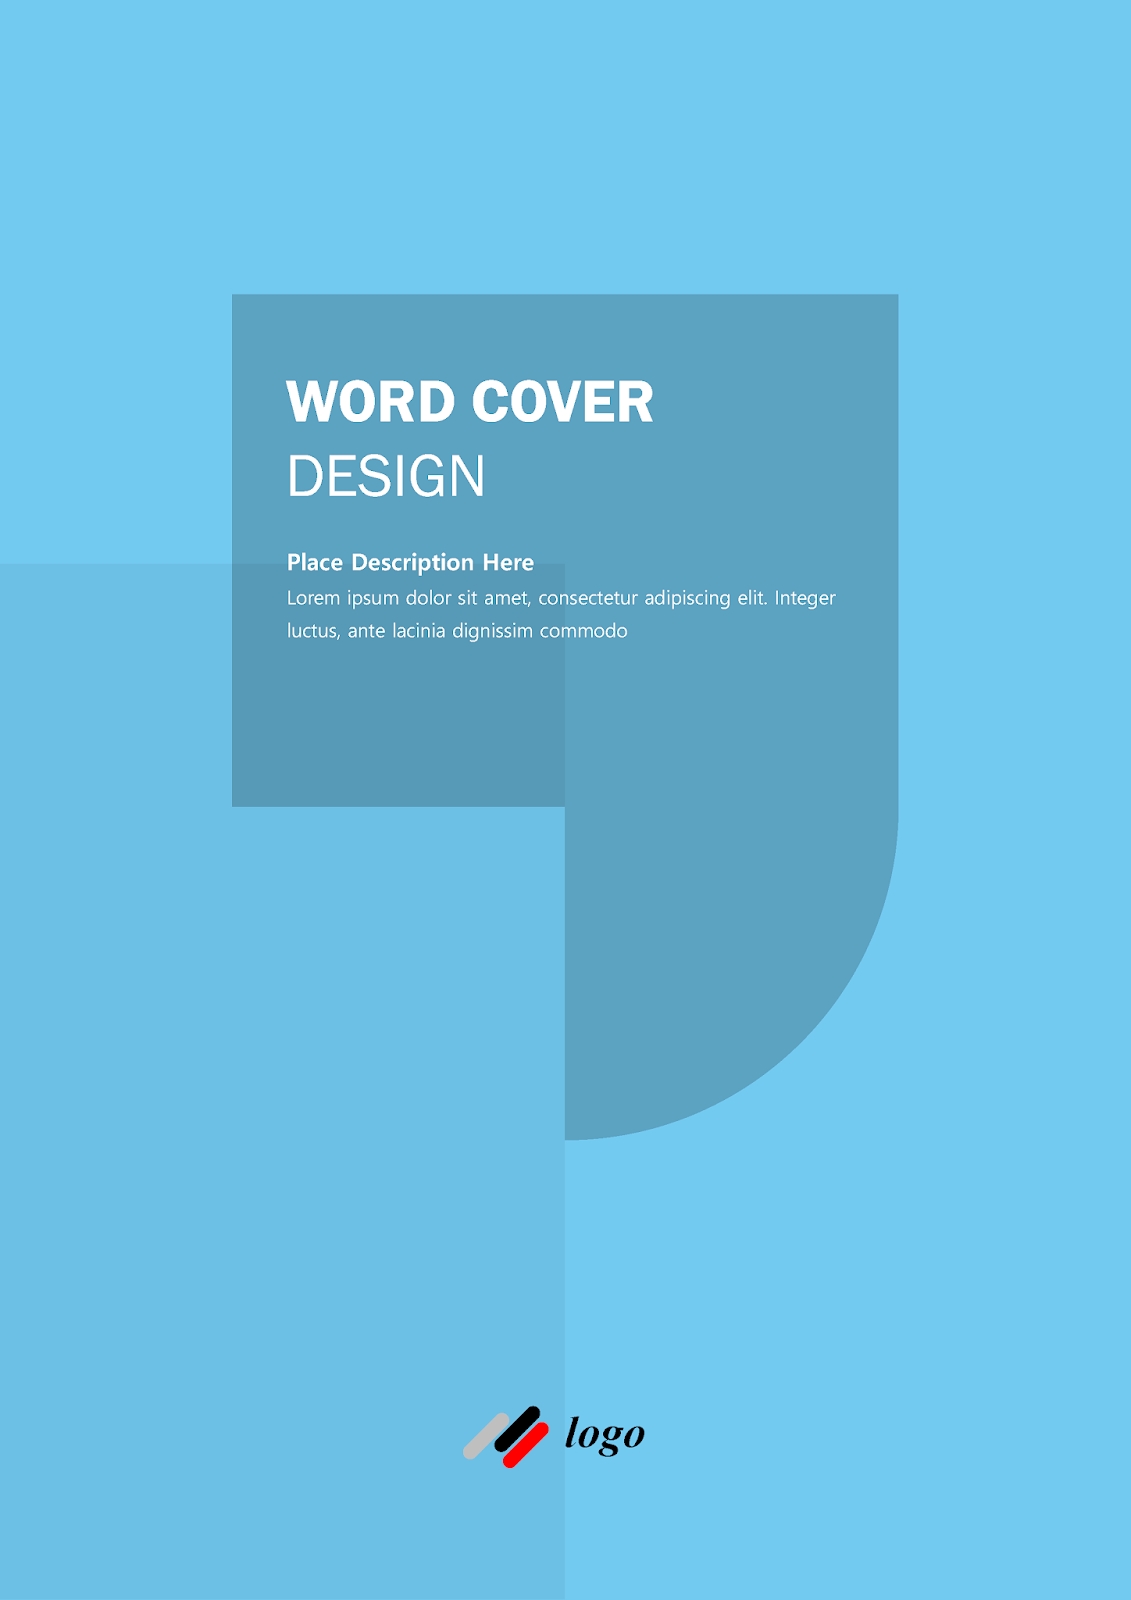 Microsoft Word Cover Templates | 104 Free Download - Word Free Within Microsoft Word Cover Page Templates Download